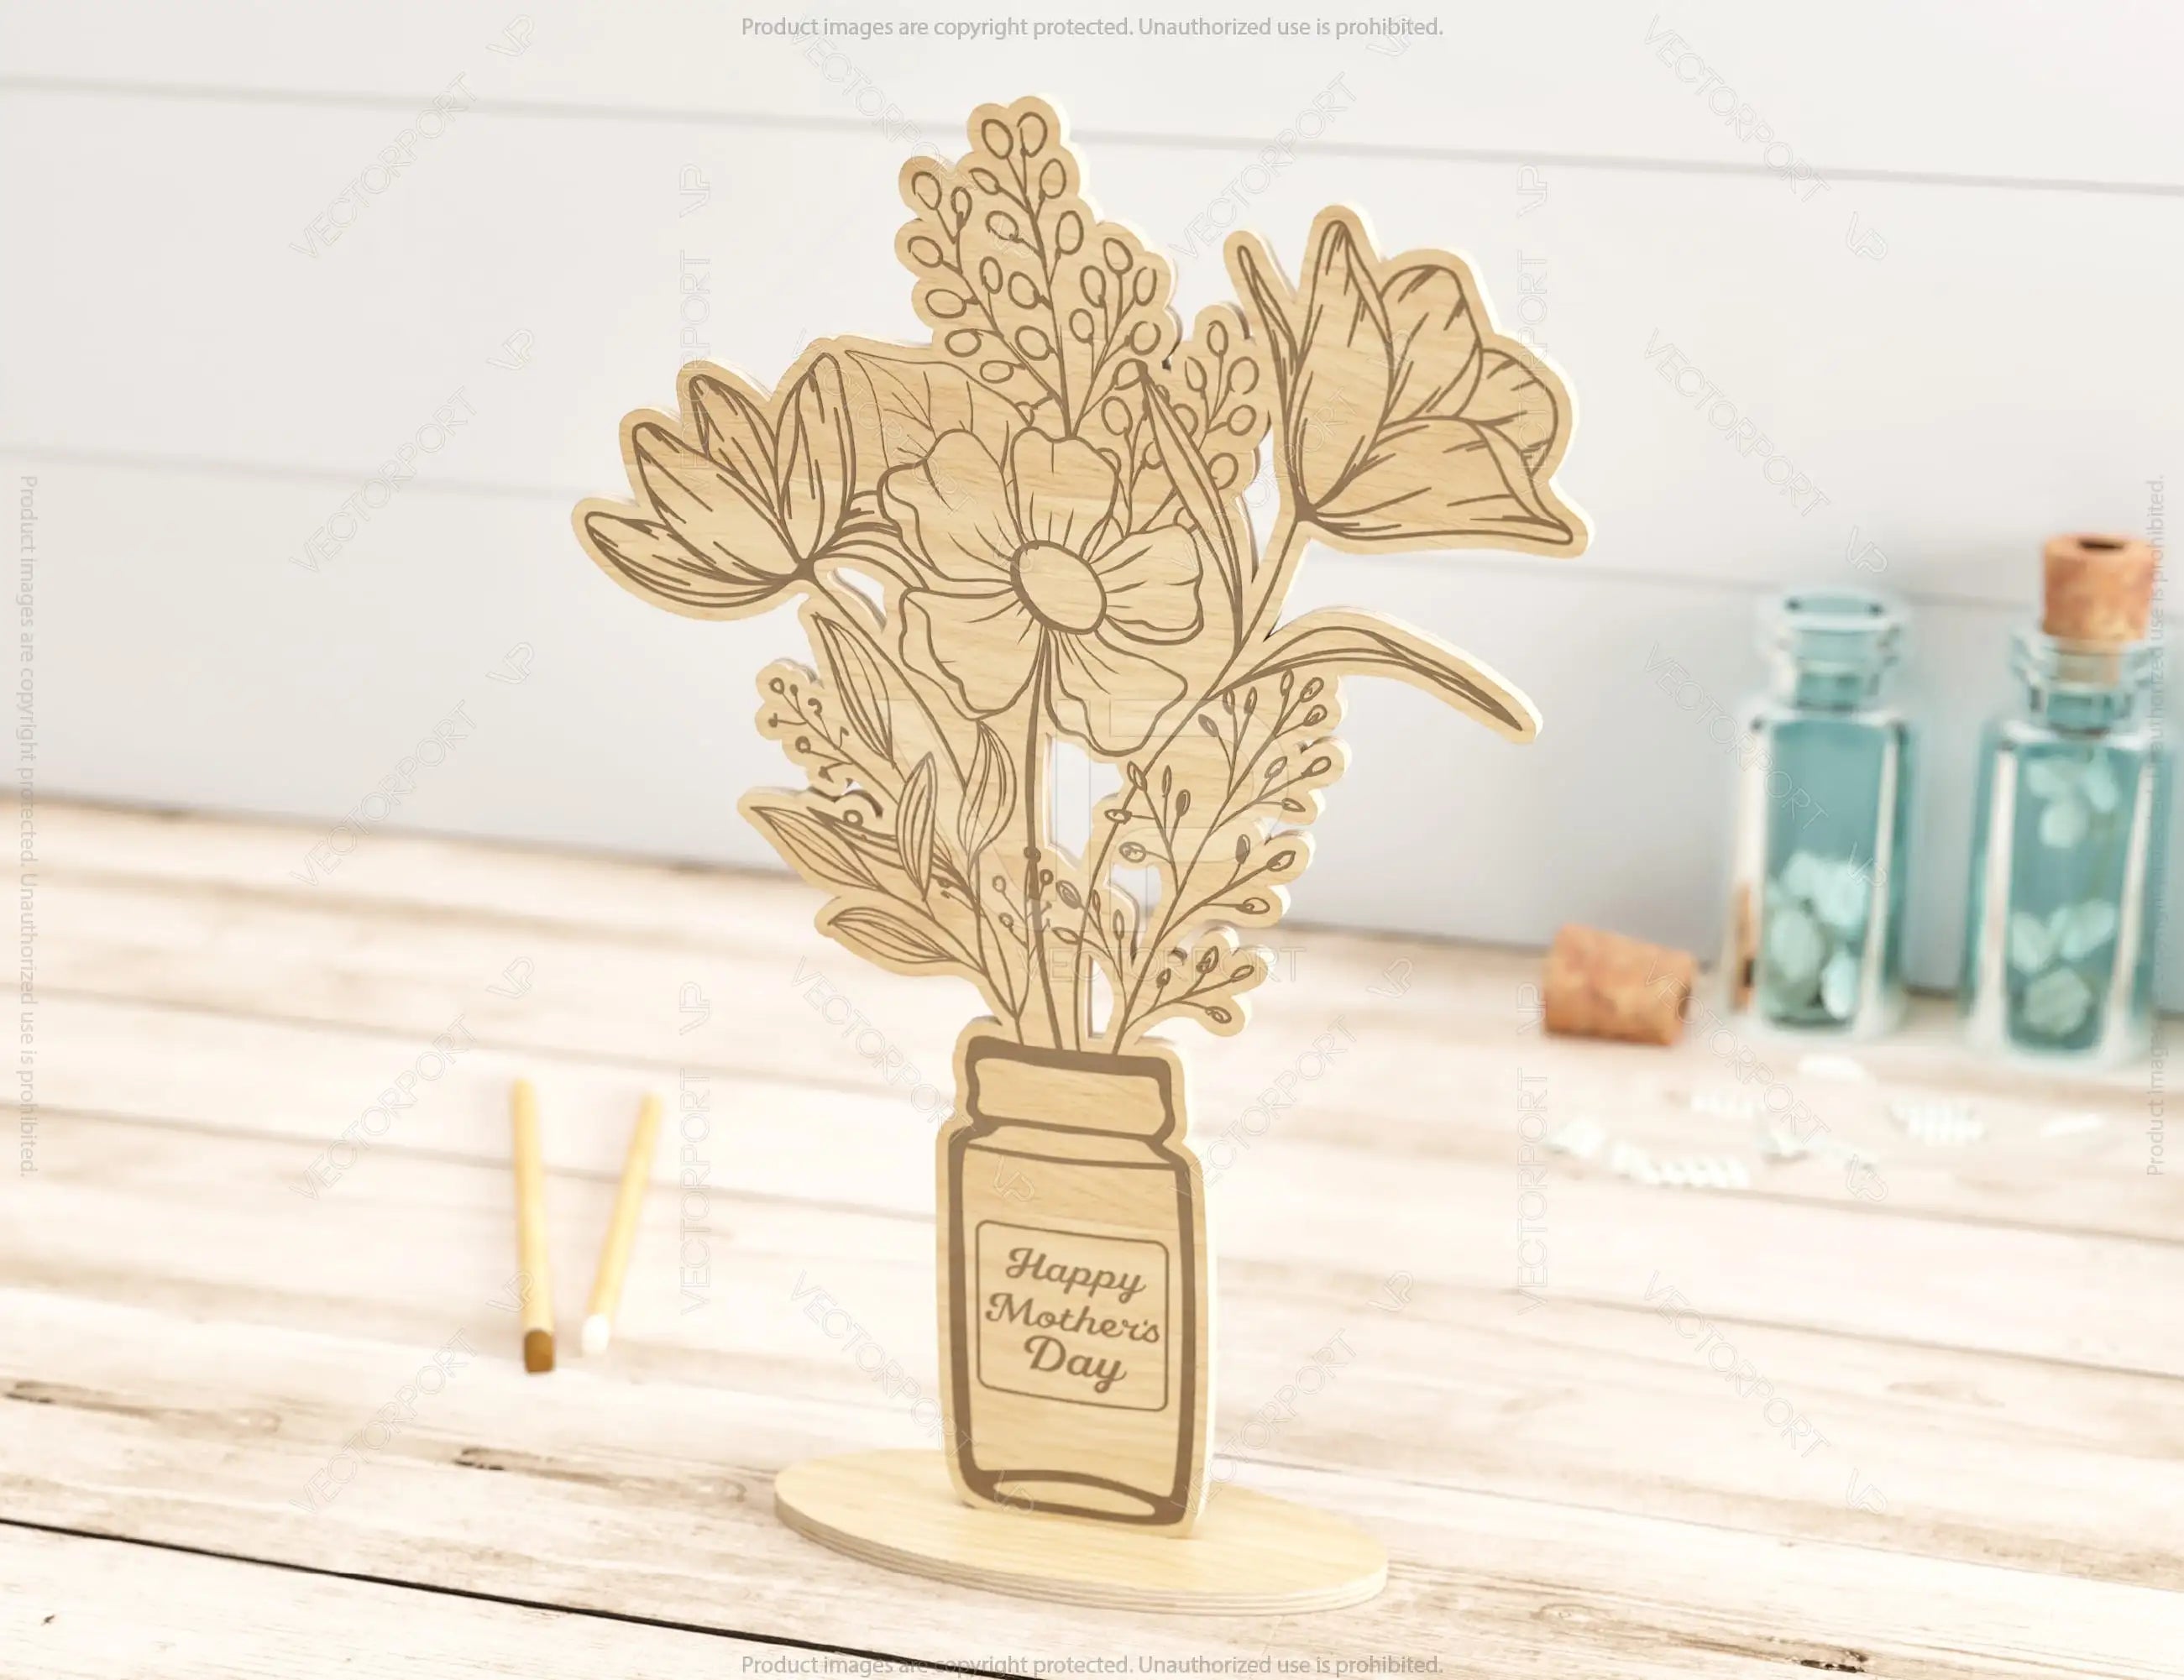 Personalized Standing Pot Flowers for Mom, Mother’s day gift laser cut SVG plan, Customizable Engraving Diy gift Digital Download |#188|